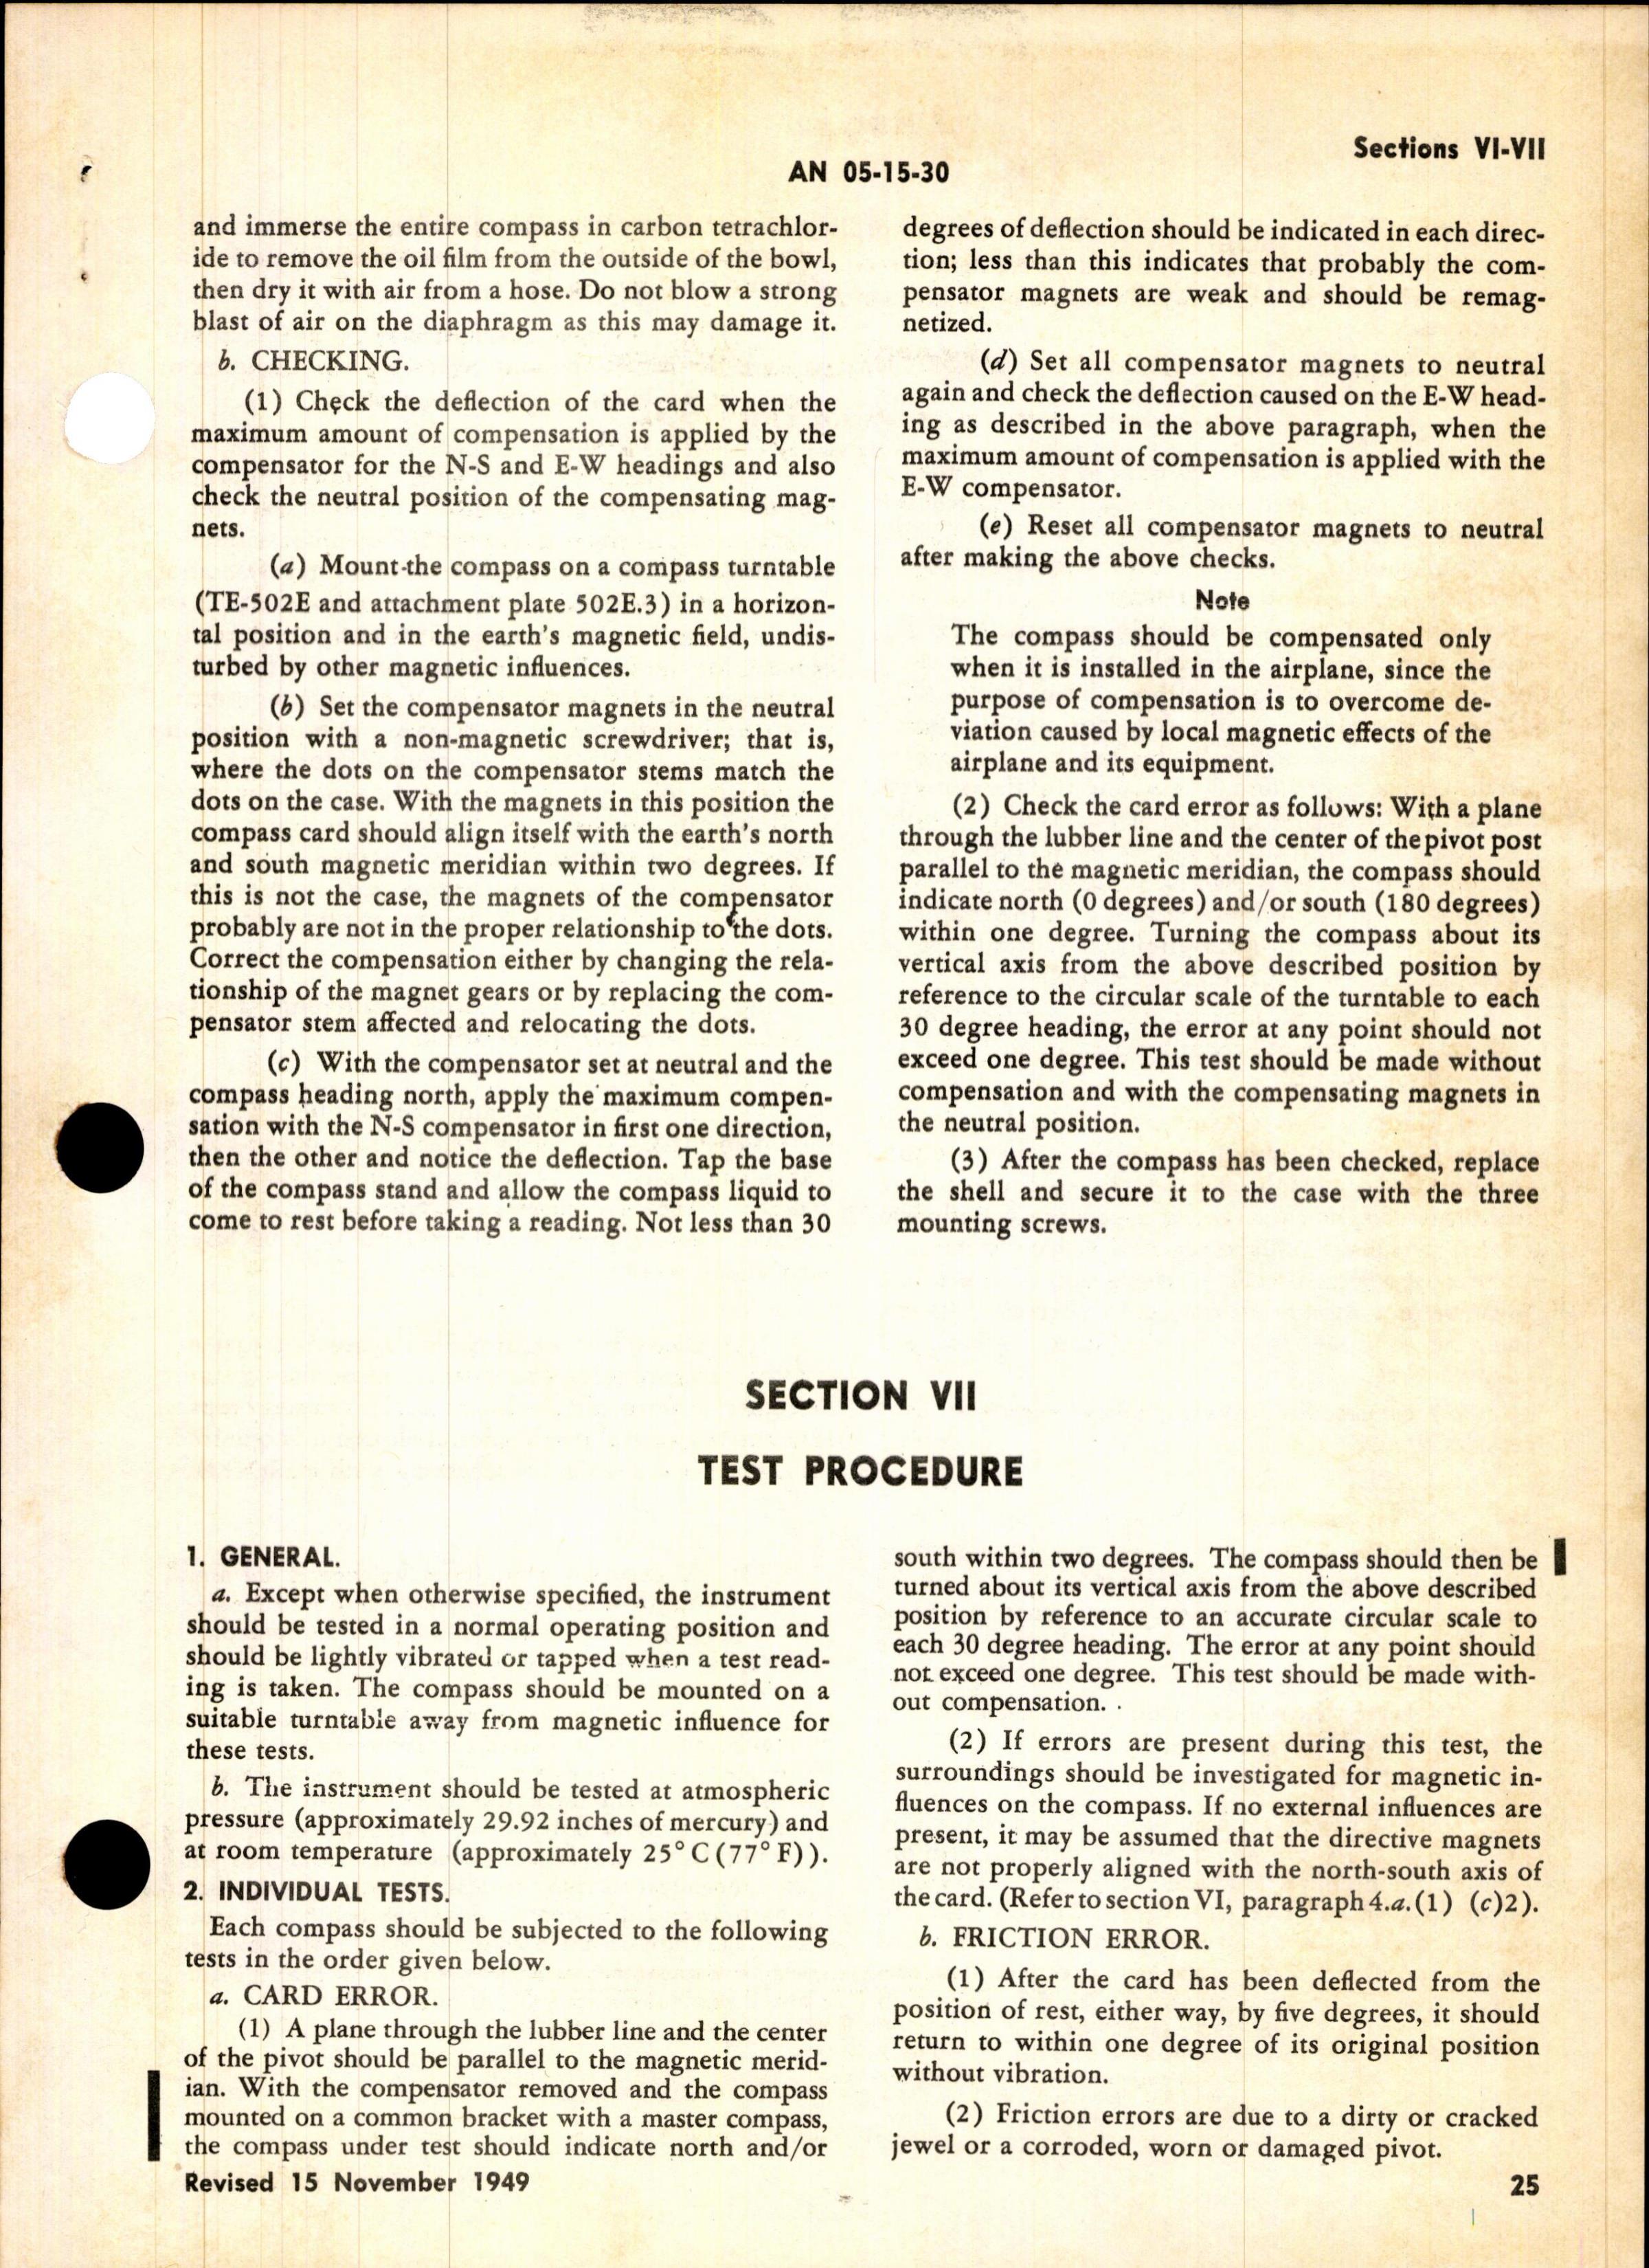 Sample page 3 from AirCorps Library document: Operation, Service & Overhaul Inst with Parts Catalog for Standby Compass Type B-21 (Kollsman)